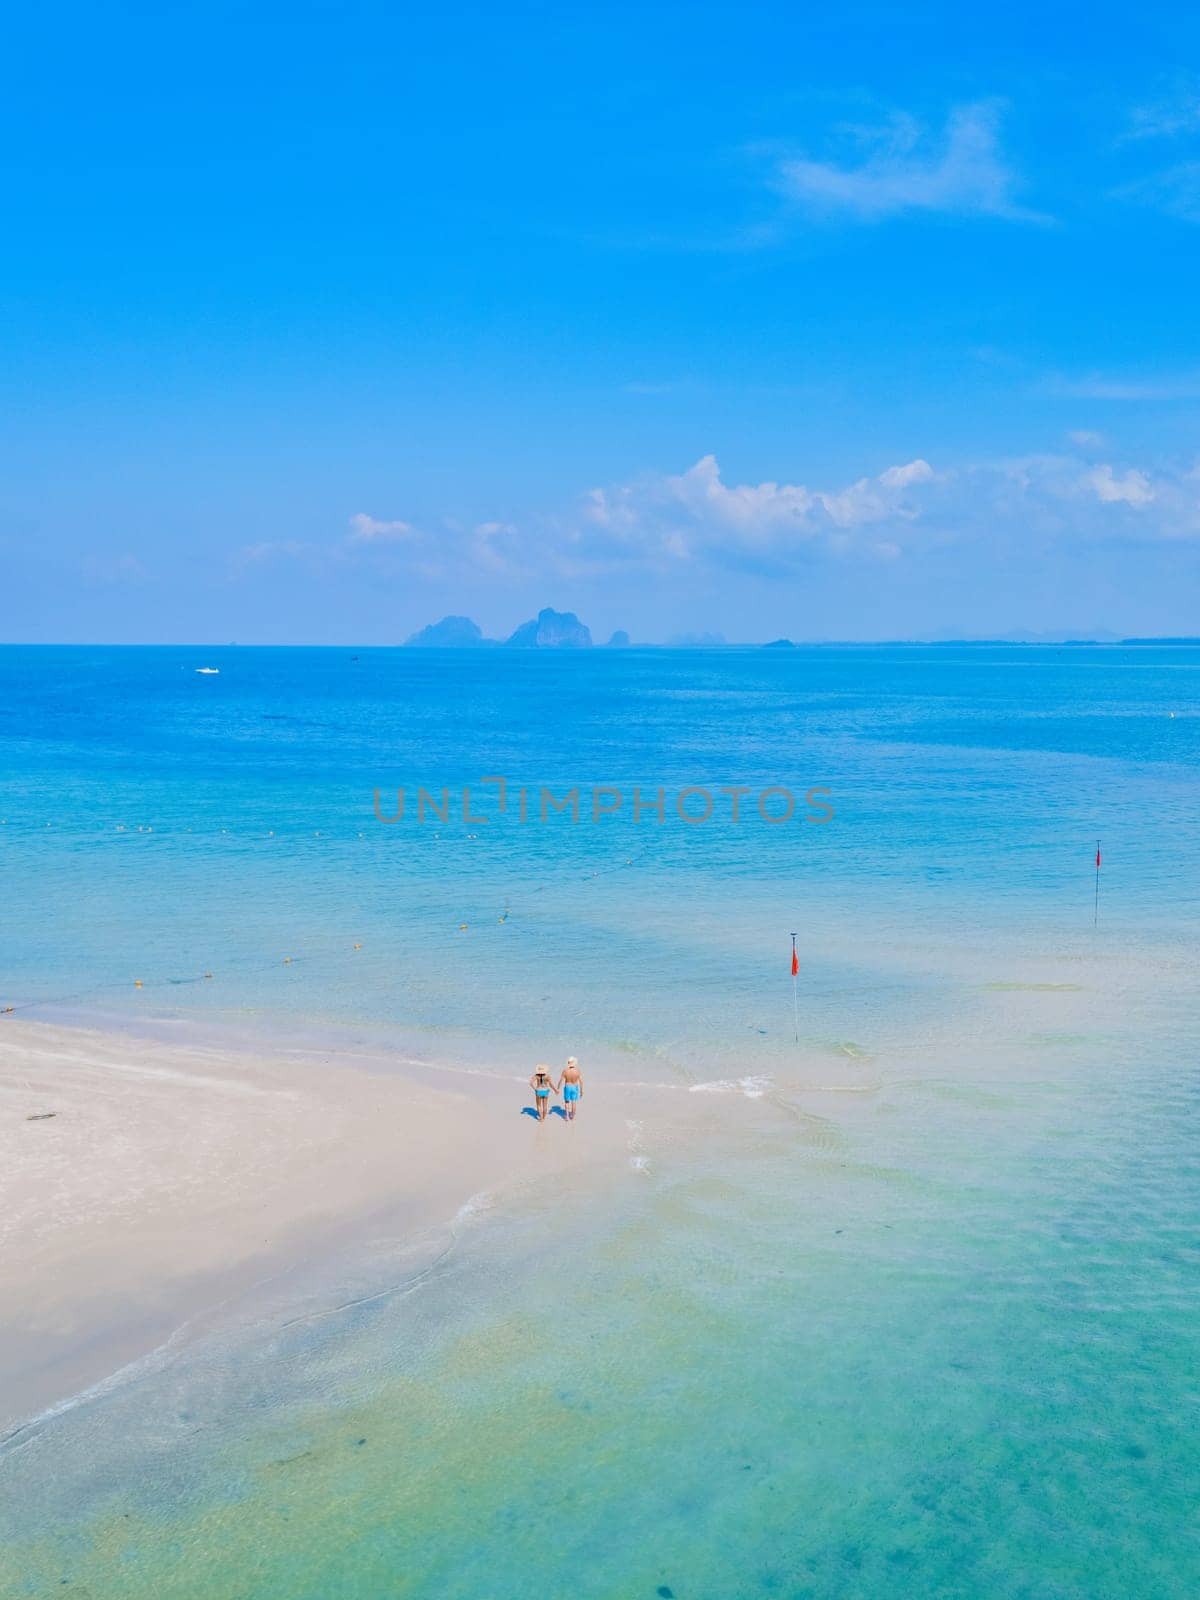 a couple of men and woman walking at the beach during a tropical vacation in Thailand, Koh Muk a tropical sandbar in a blue ocean with soft white sand, and a turqouse colored ocean Koh Mook Thailand